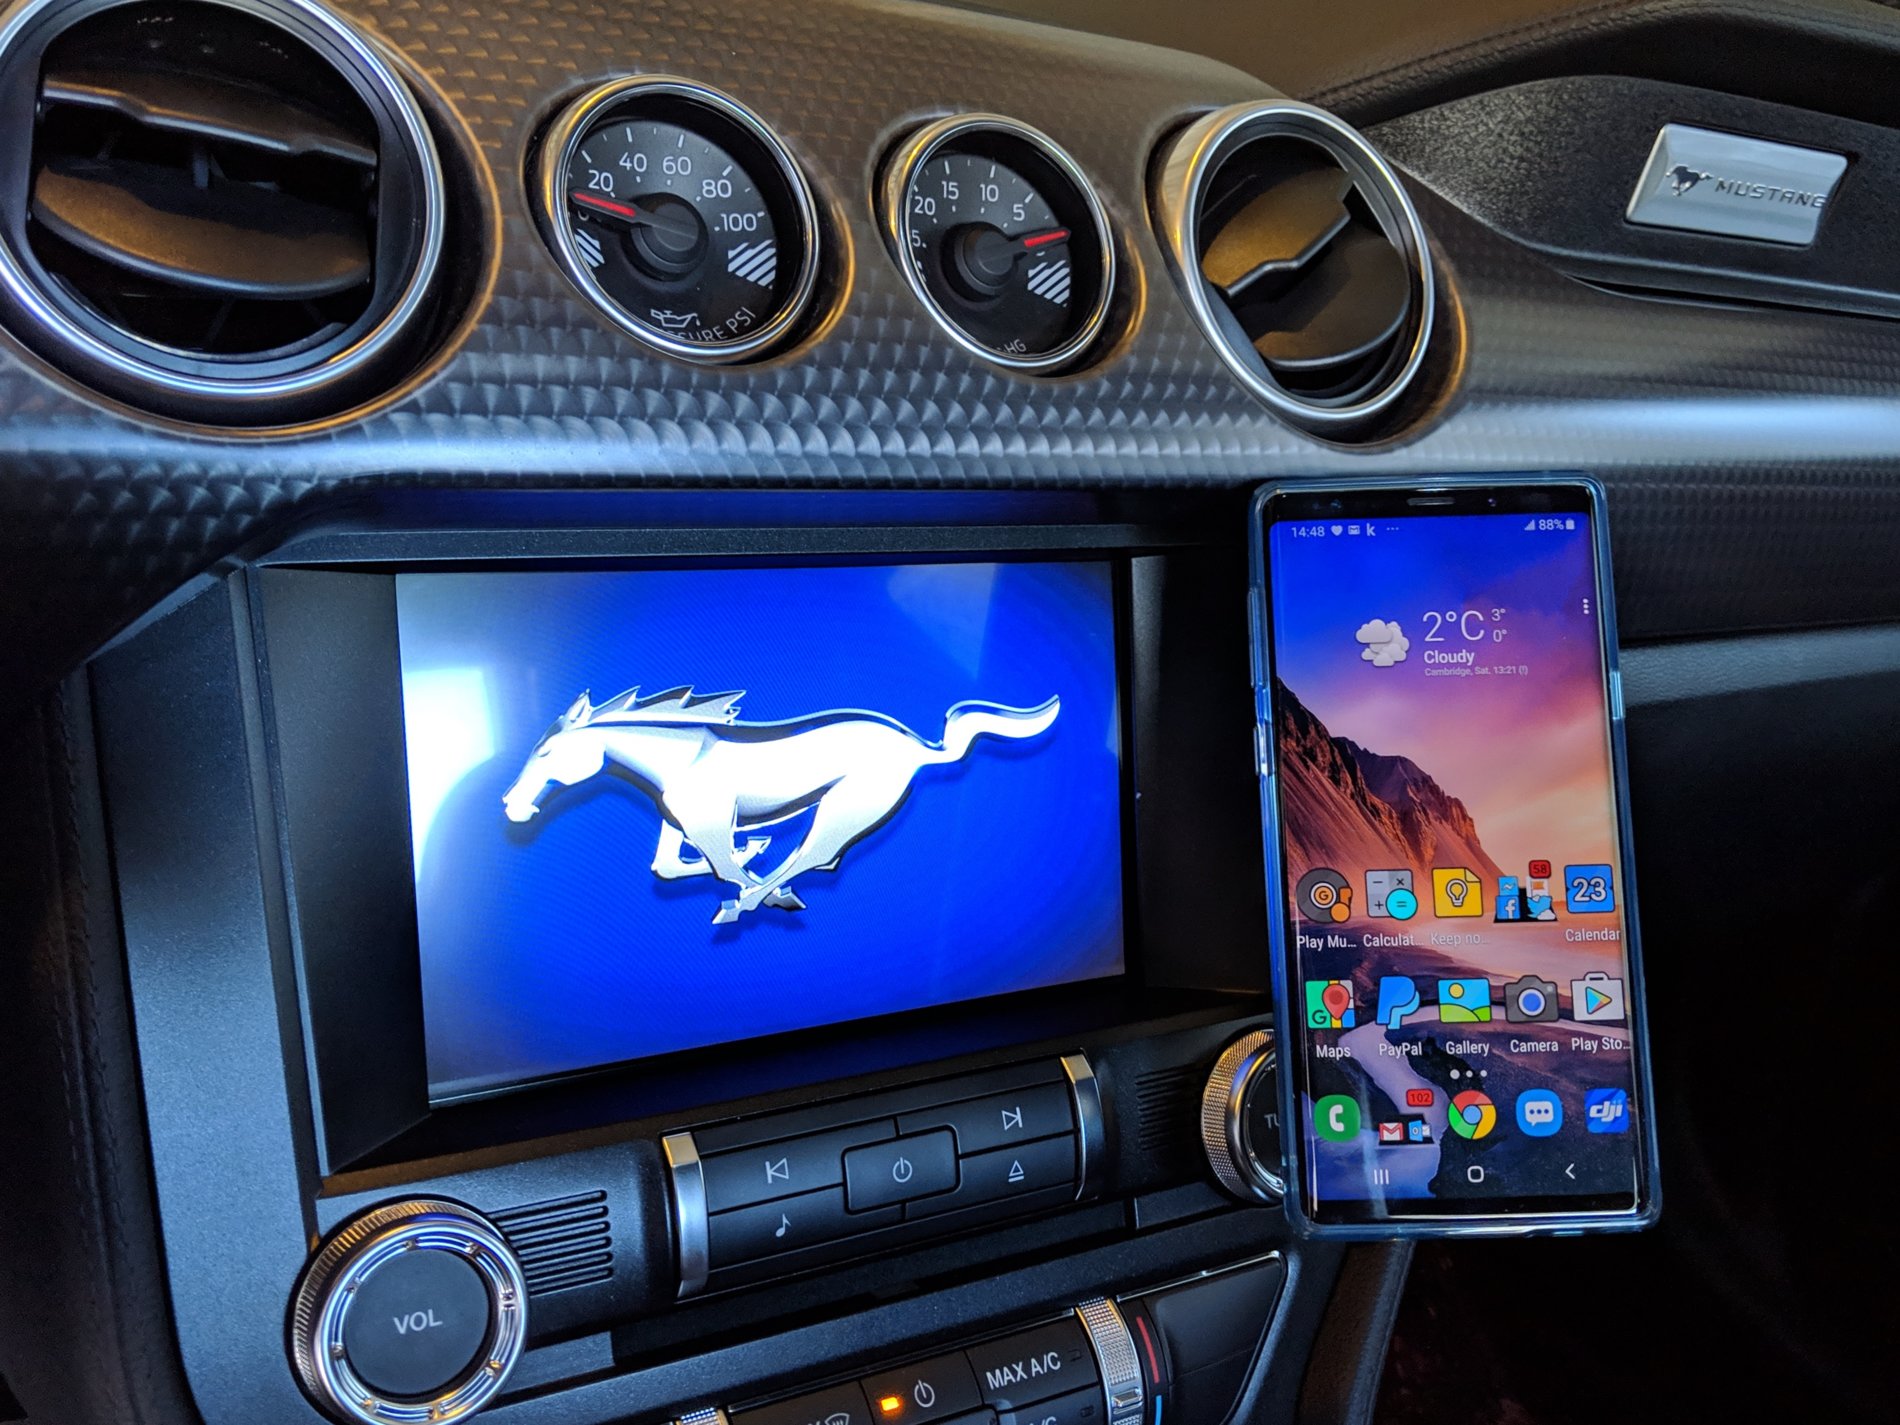 Cell phone holder / mount | Page 3 | 2015+ S550 Mustang Forum (GT